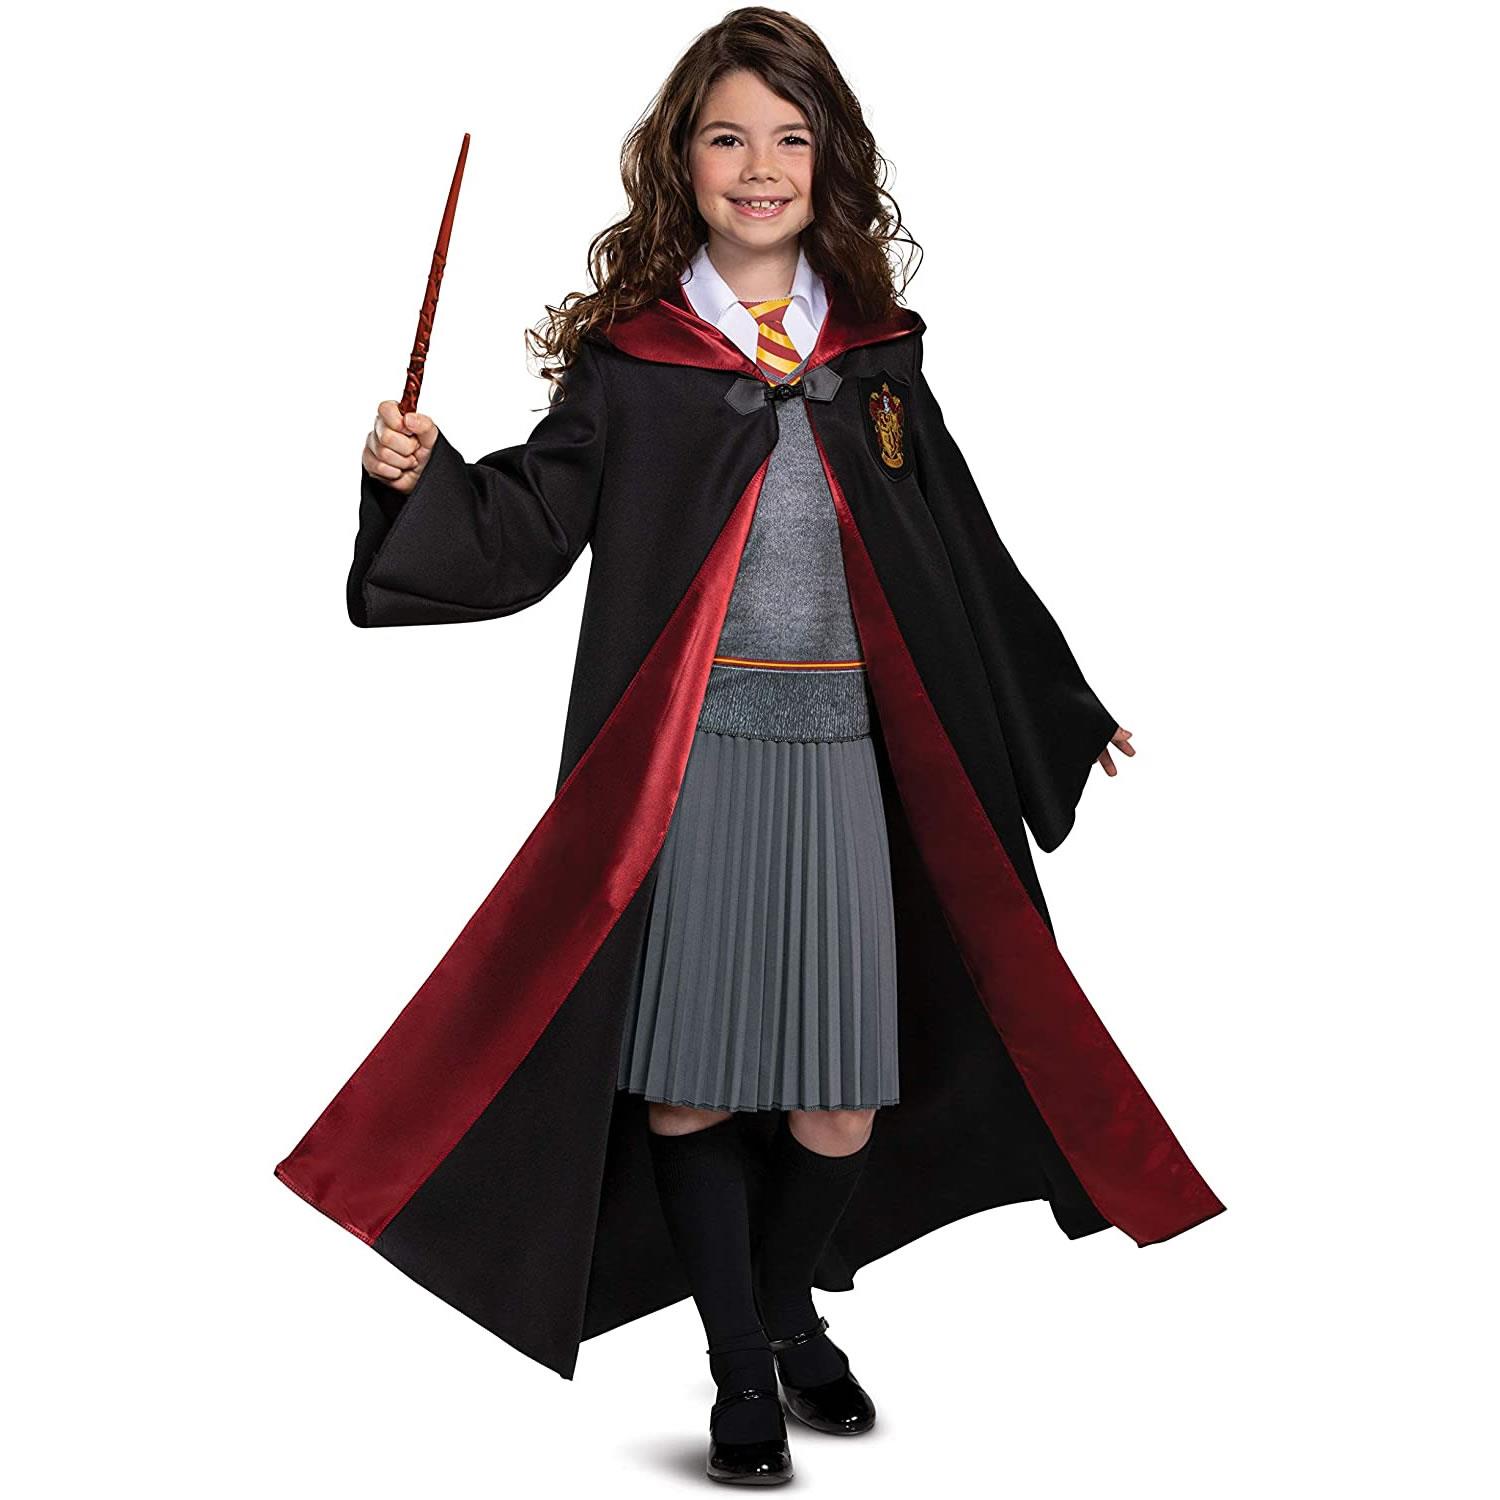 HERMIONE GRANGER WAND - image 2 of 2